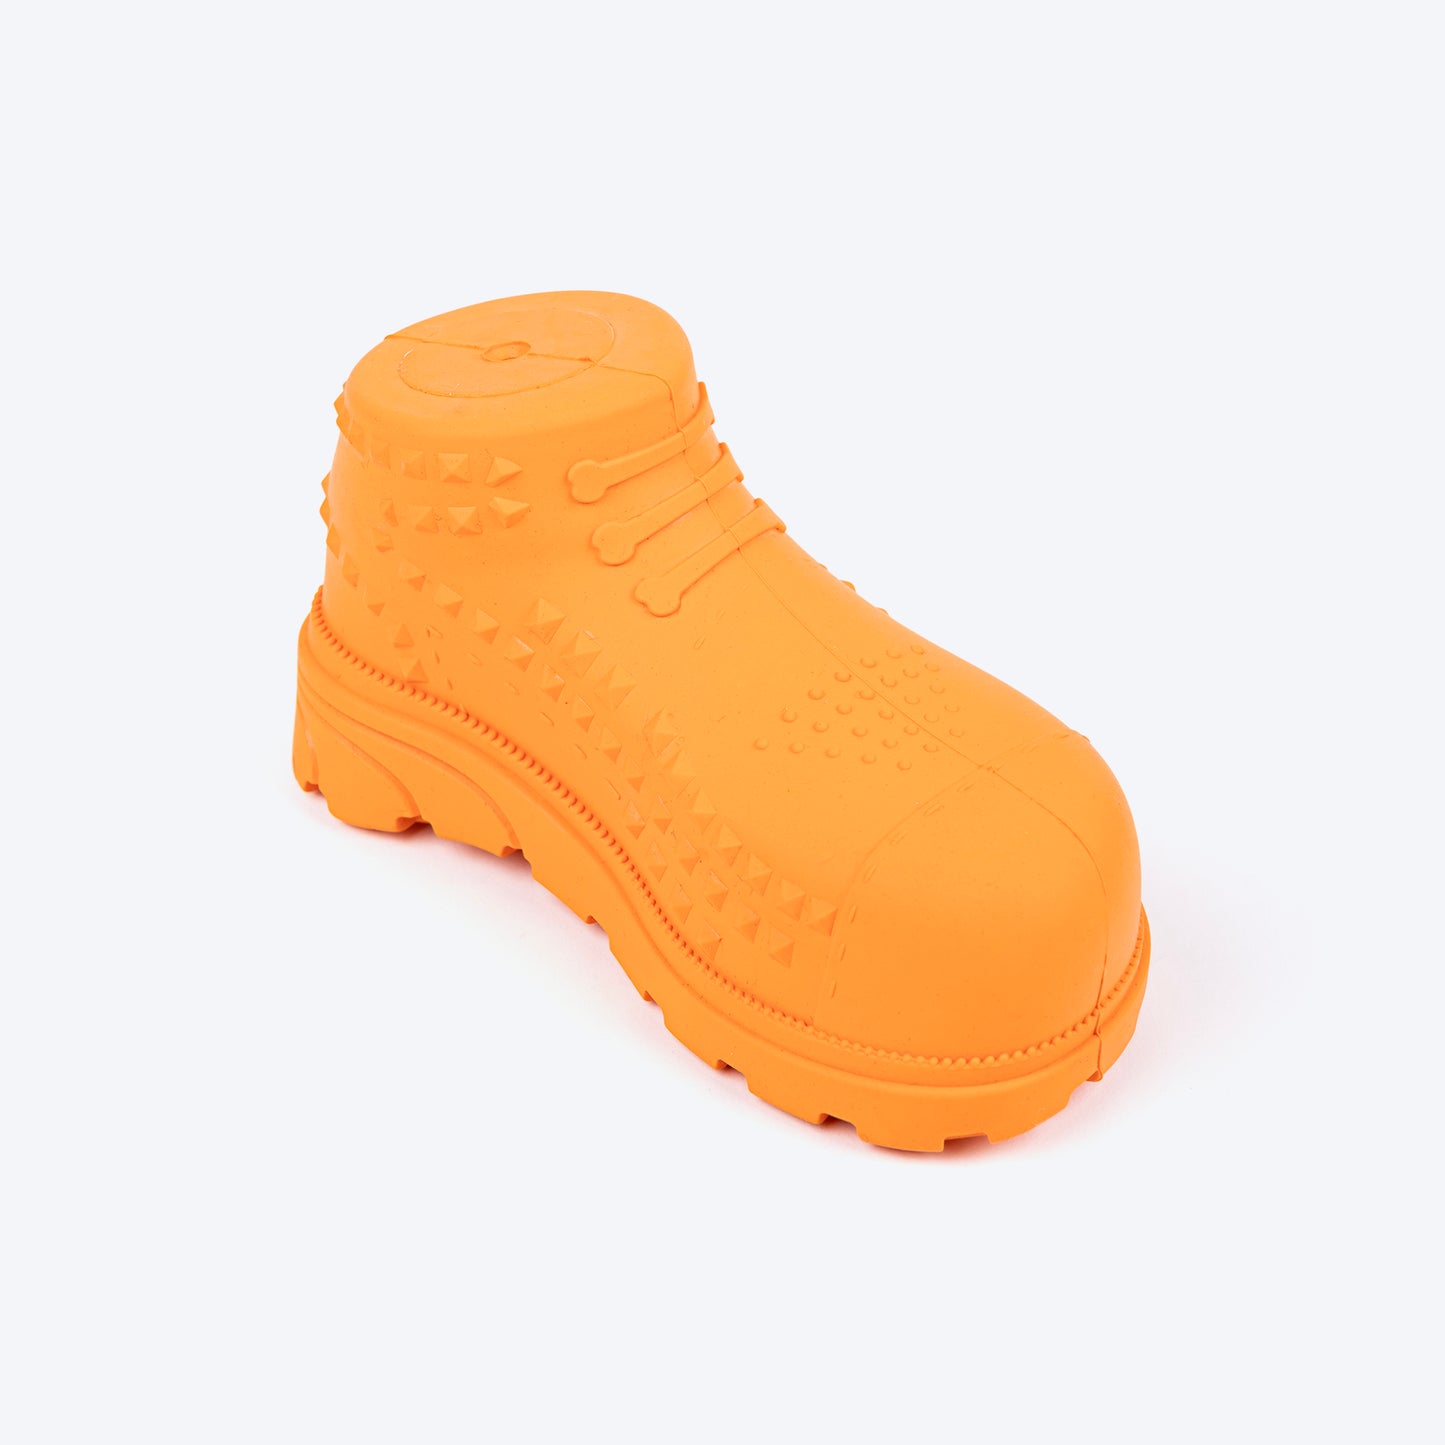 HUFT Squeaky Shoe Chew Toy For Dog - Orange - Heads Up For Tails